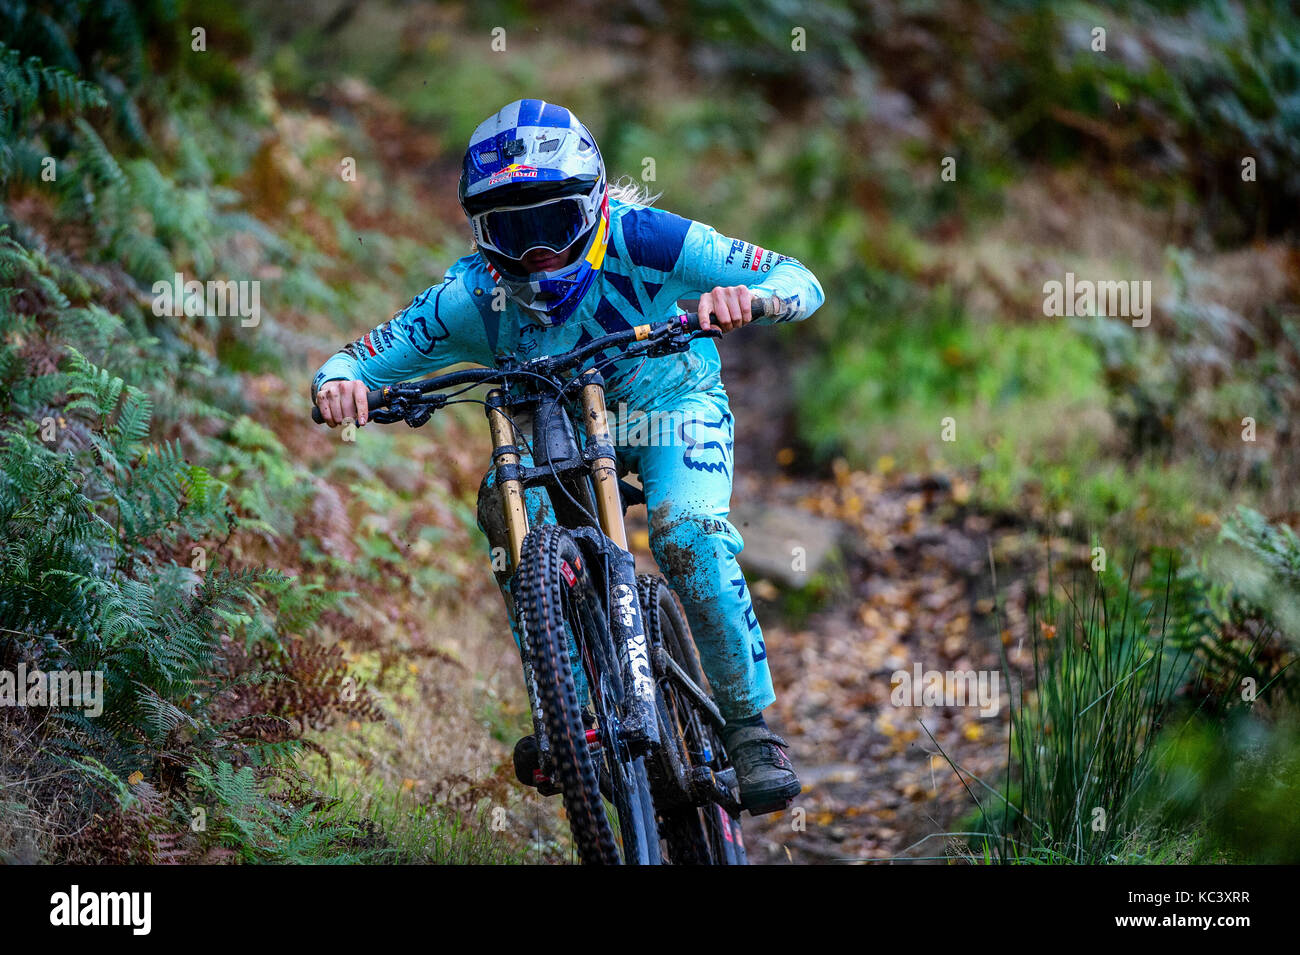 Professional downhill mountain bike racer Tahnée Seagrave from the United  Kingdom. Pictured riding at Bikepark Wales Stock Photo - Alamy